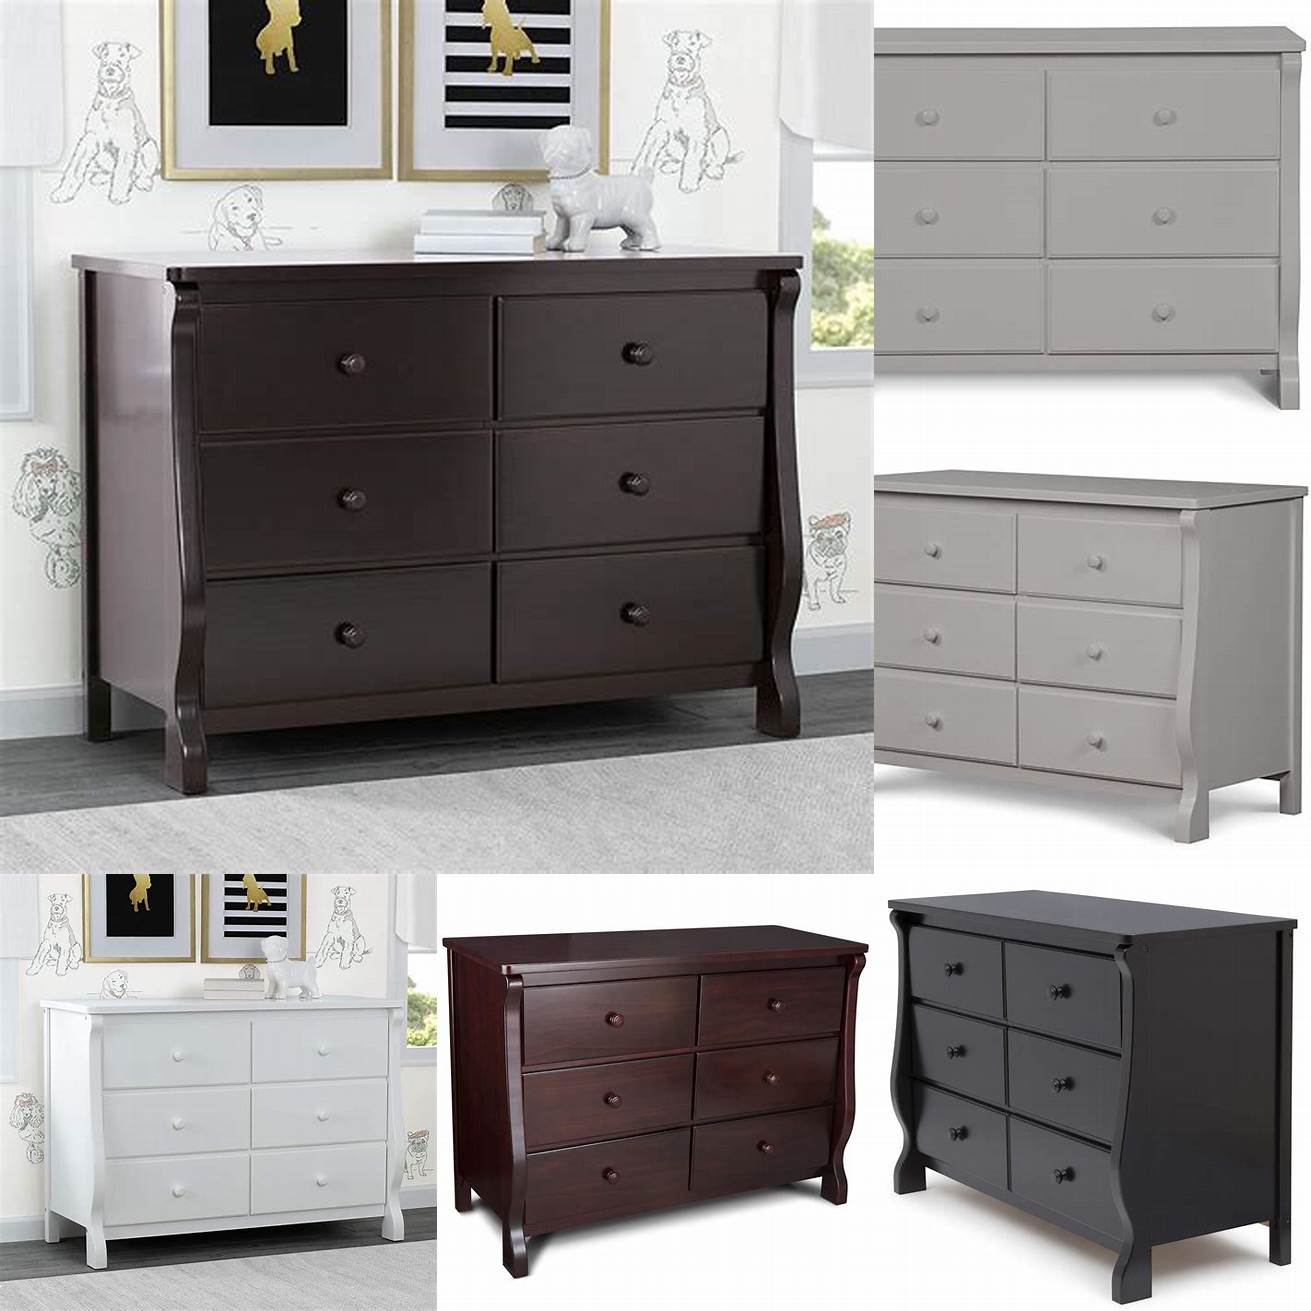 The Delta Children Universal 6 Drawer Dresser is a stylish and functional option for kids It has six spacious drawers and comes in a variety of colors